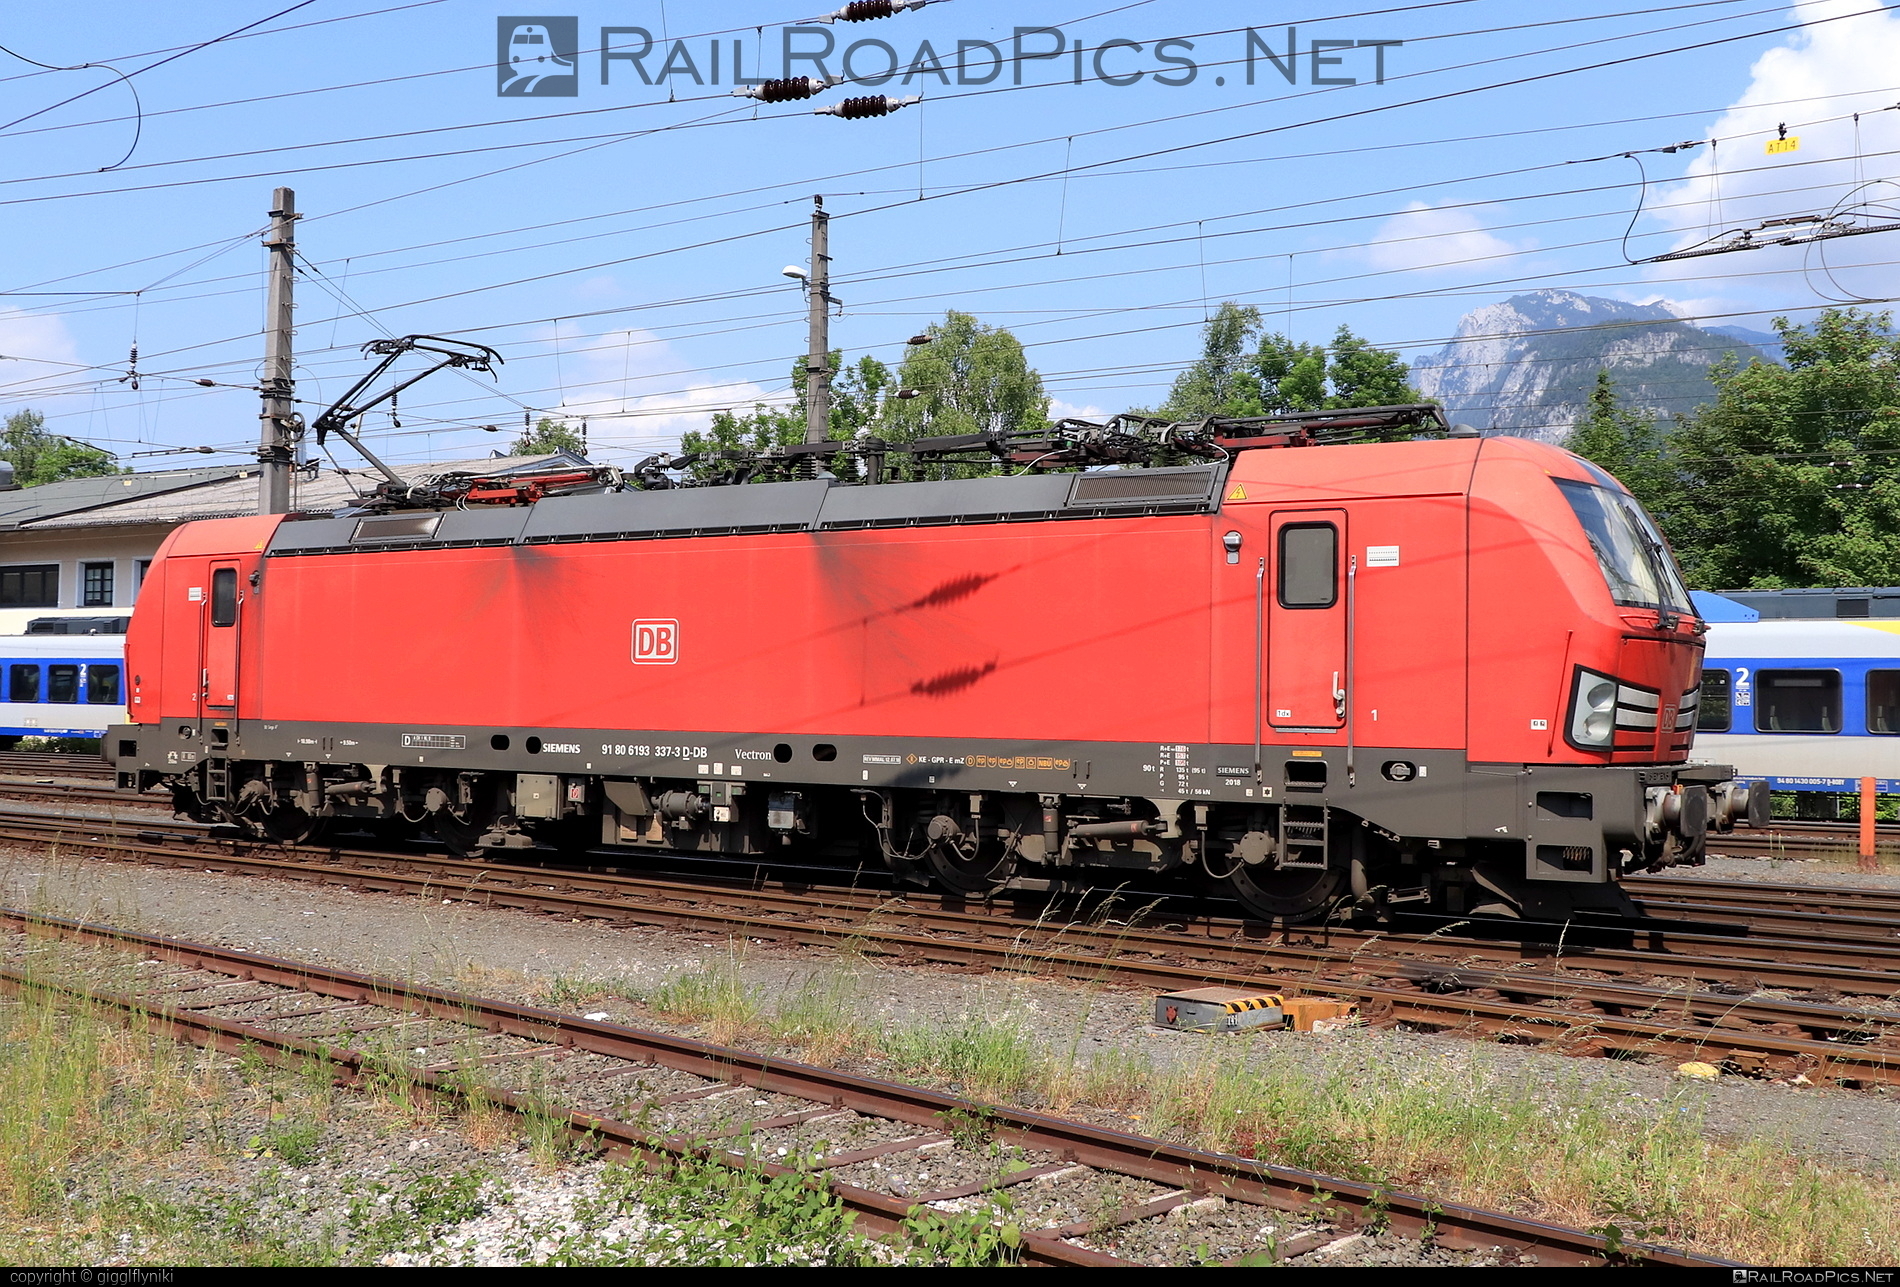 Siemens Vectron MS - 193 337 operated by DB Cargo AG #db #dbcargo #dbcargoag #deutschebahn #siemens #siemensVectron #siemensVectronMS #vectron #vectronMS